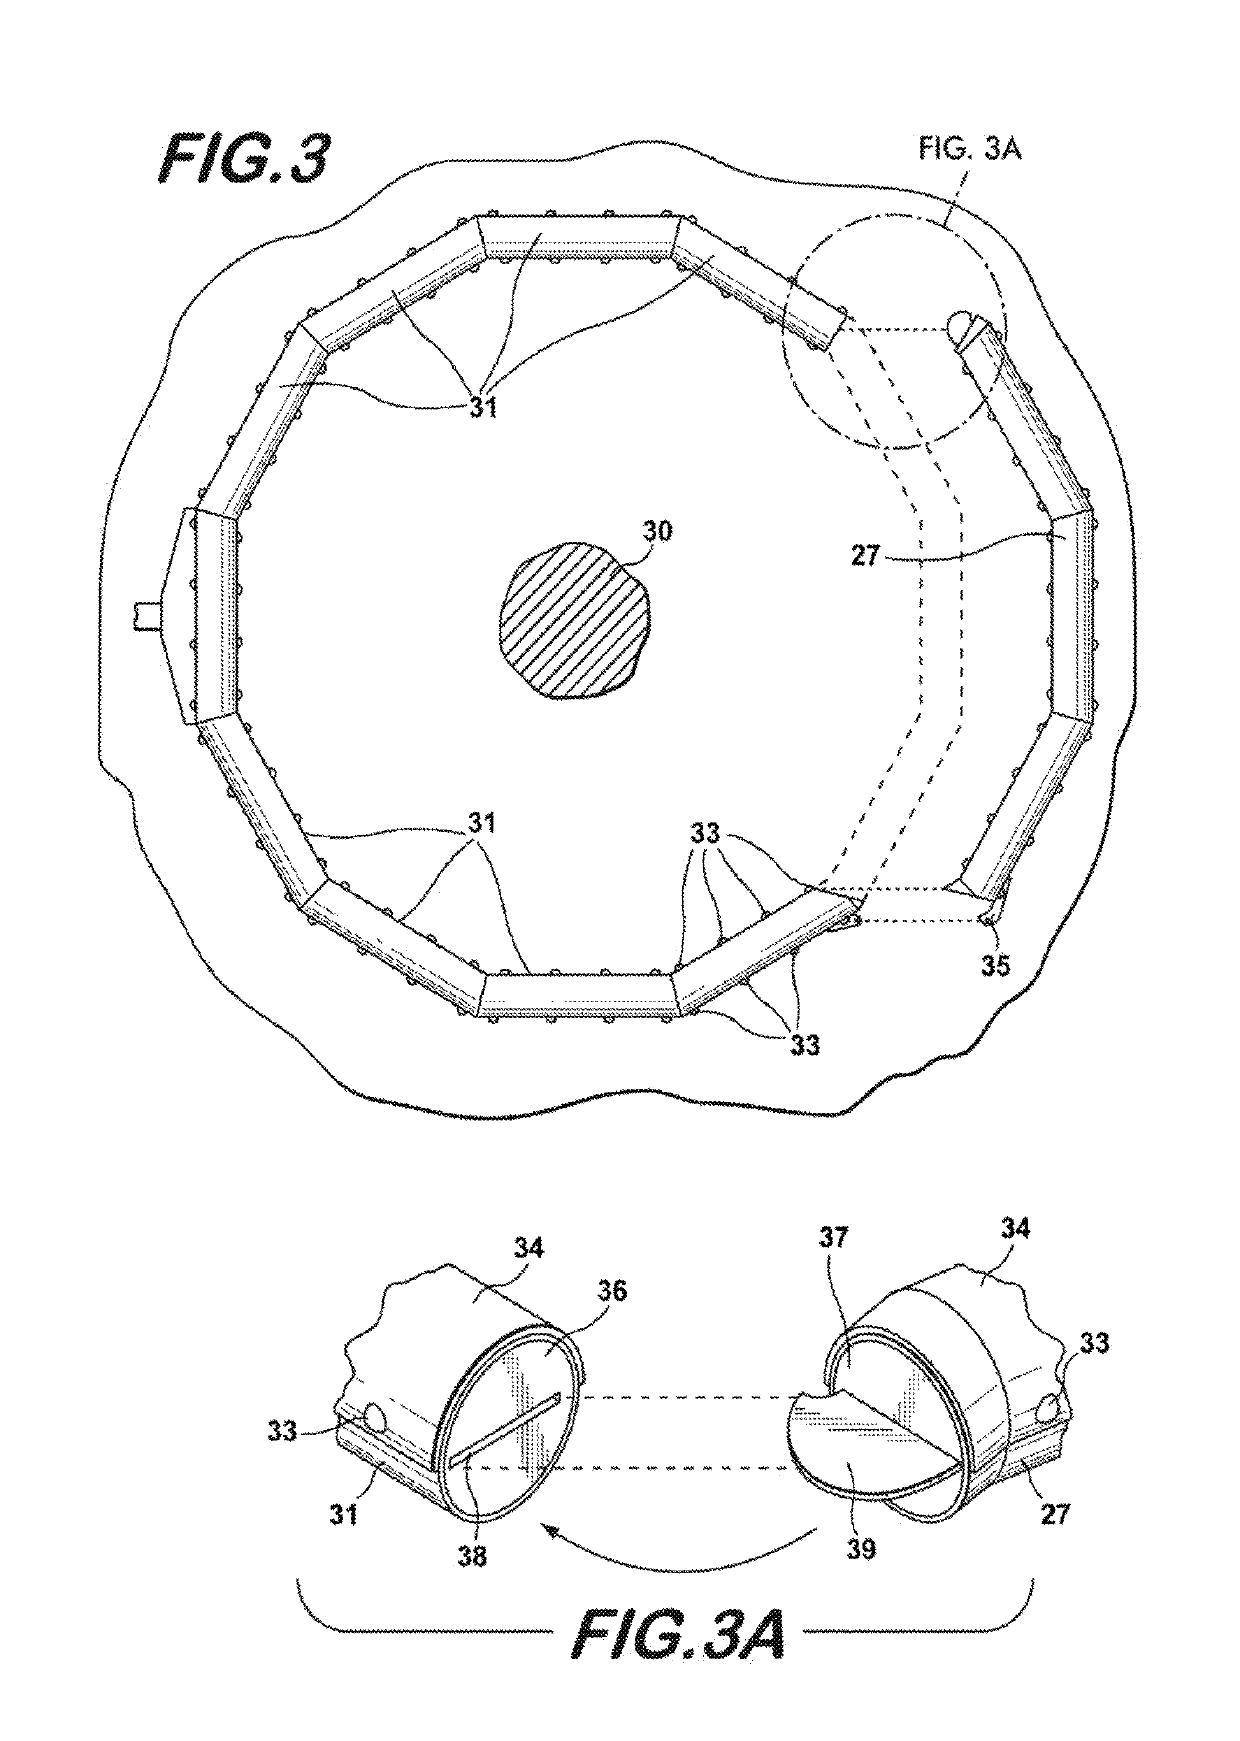 Compression ring for tying tree branches